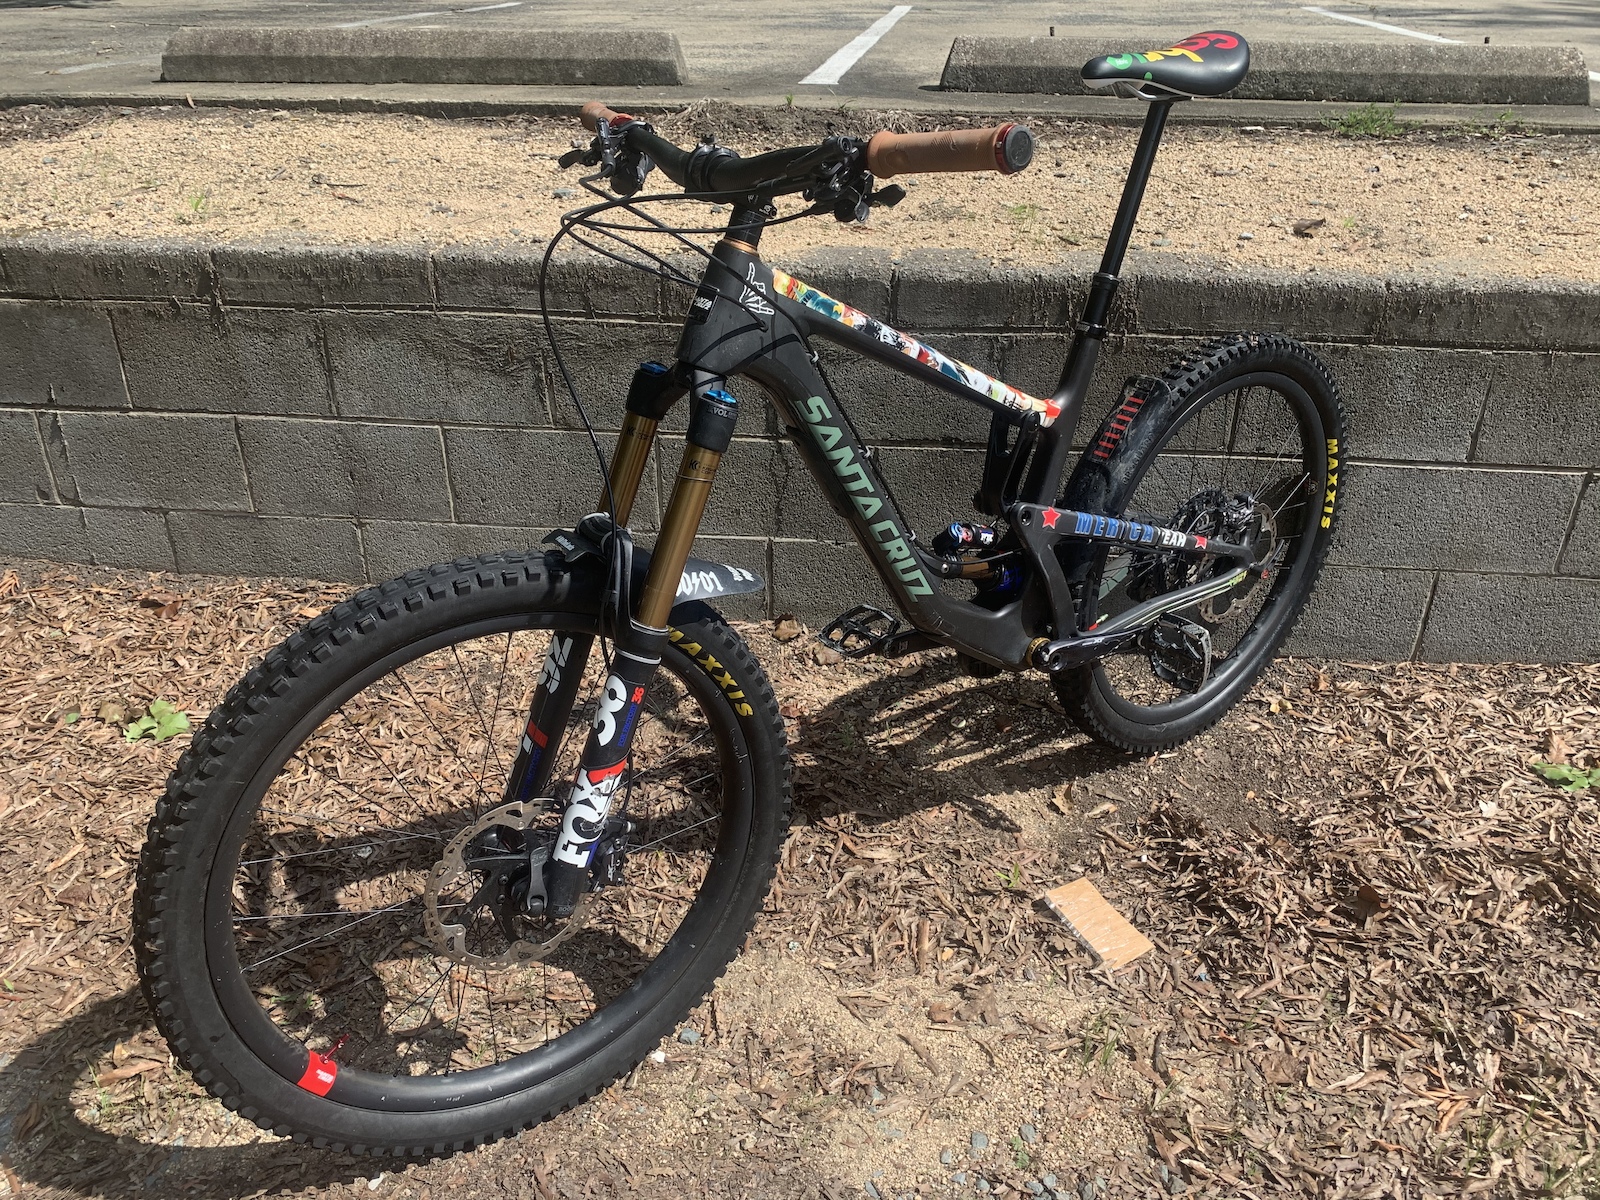 Santa Cruz Nomad C Reserve Custom Build! Size LG - Buy and Sell - Mountain Biking Forums / Message Boards